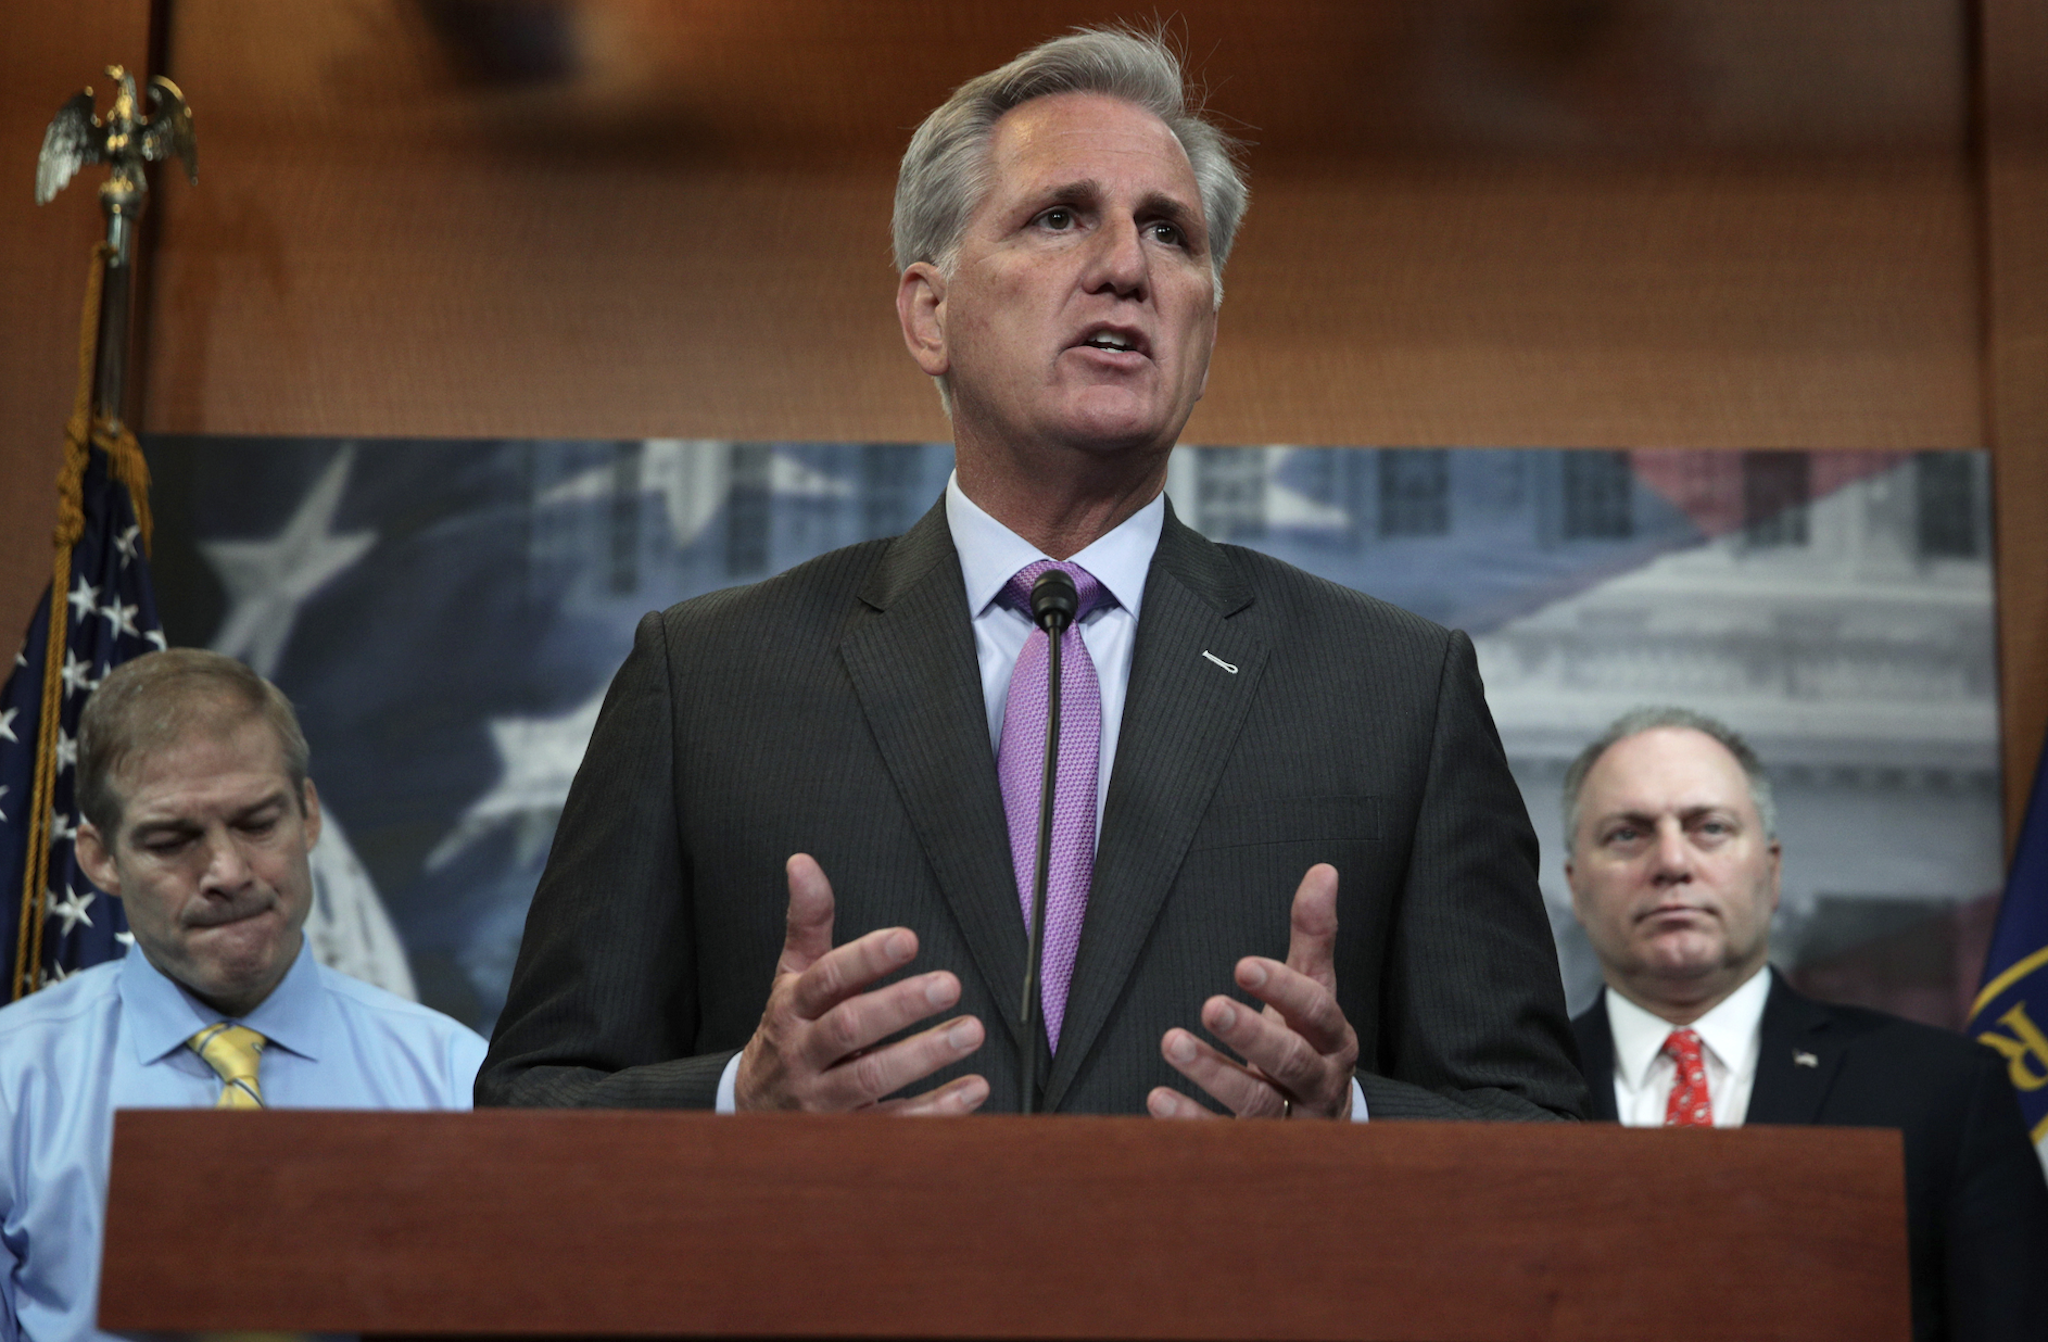 California Rep. Kevin McCarthy, who served as House minority leader before the GOP won a majority in November, seemed poised to become the nation’s third-most powerful elected official until a small group of Republicans refused to back him in a series of votes this week.